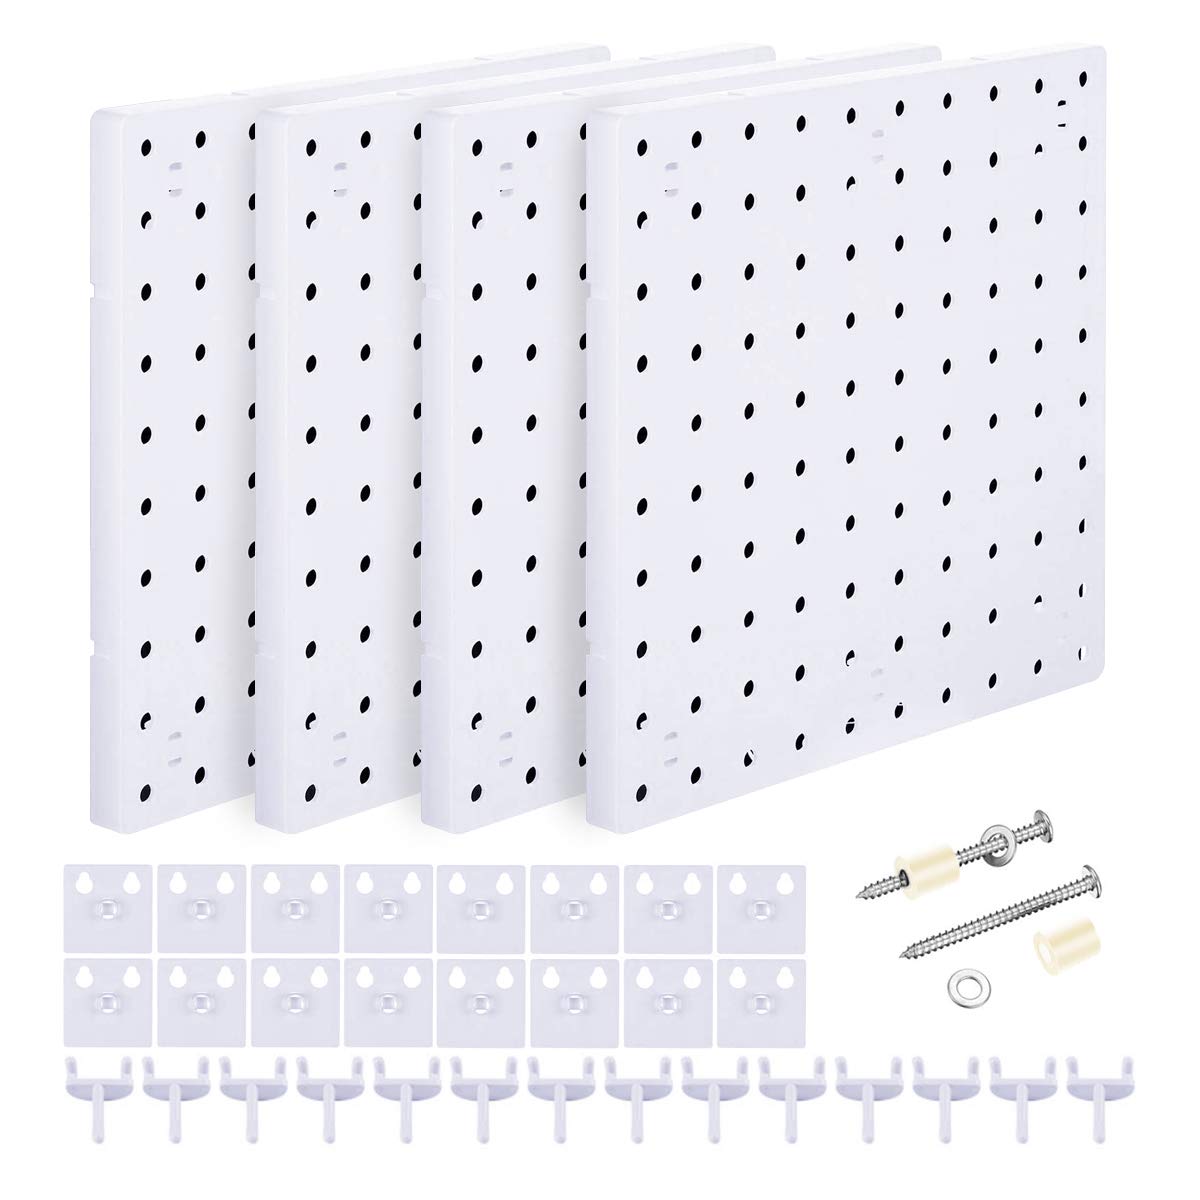 Pegboard Wall Mount Display Pegboard Wall Panel, 4 Pack Pegboard Organizer with 2 Installation Ways, Durable Plastic Wall Organizer Kit, Pegboard A...